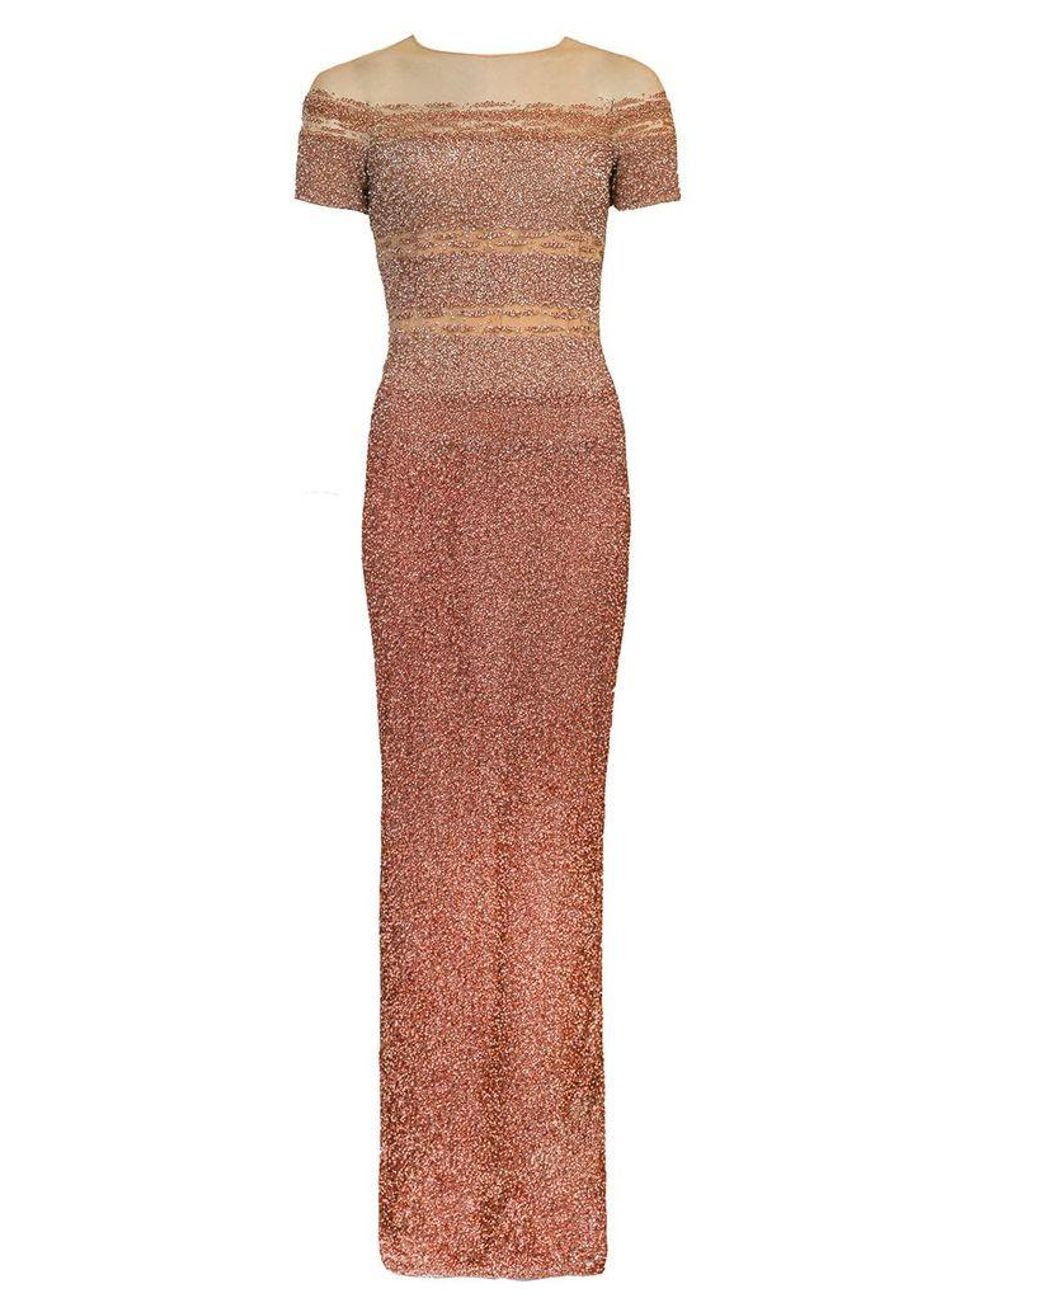 Womens Clothing Dresses Cocktail and party dresses Save 29% Pamella Roland Silver & Gold Ombre Sequin Cocktail Dress 